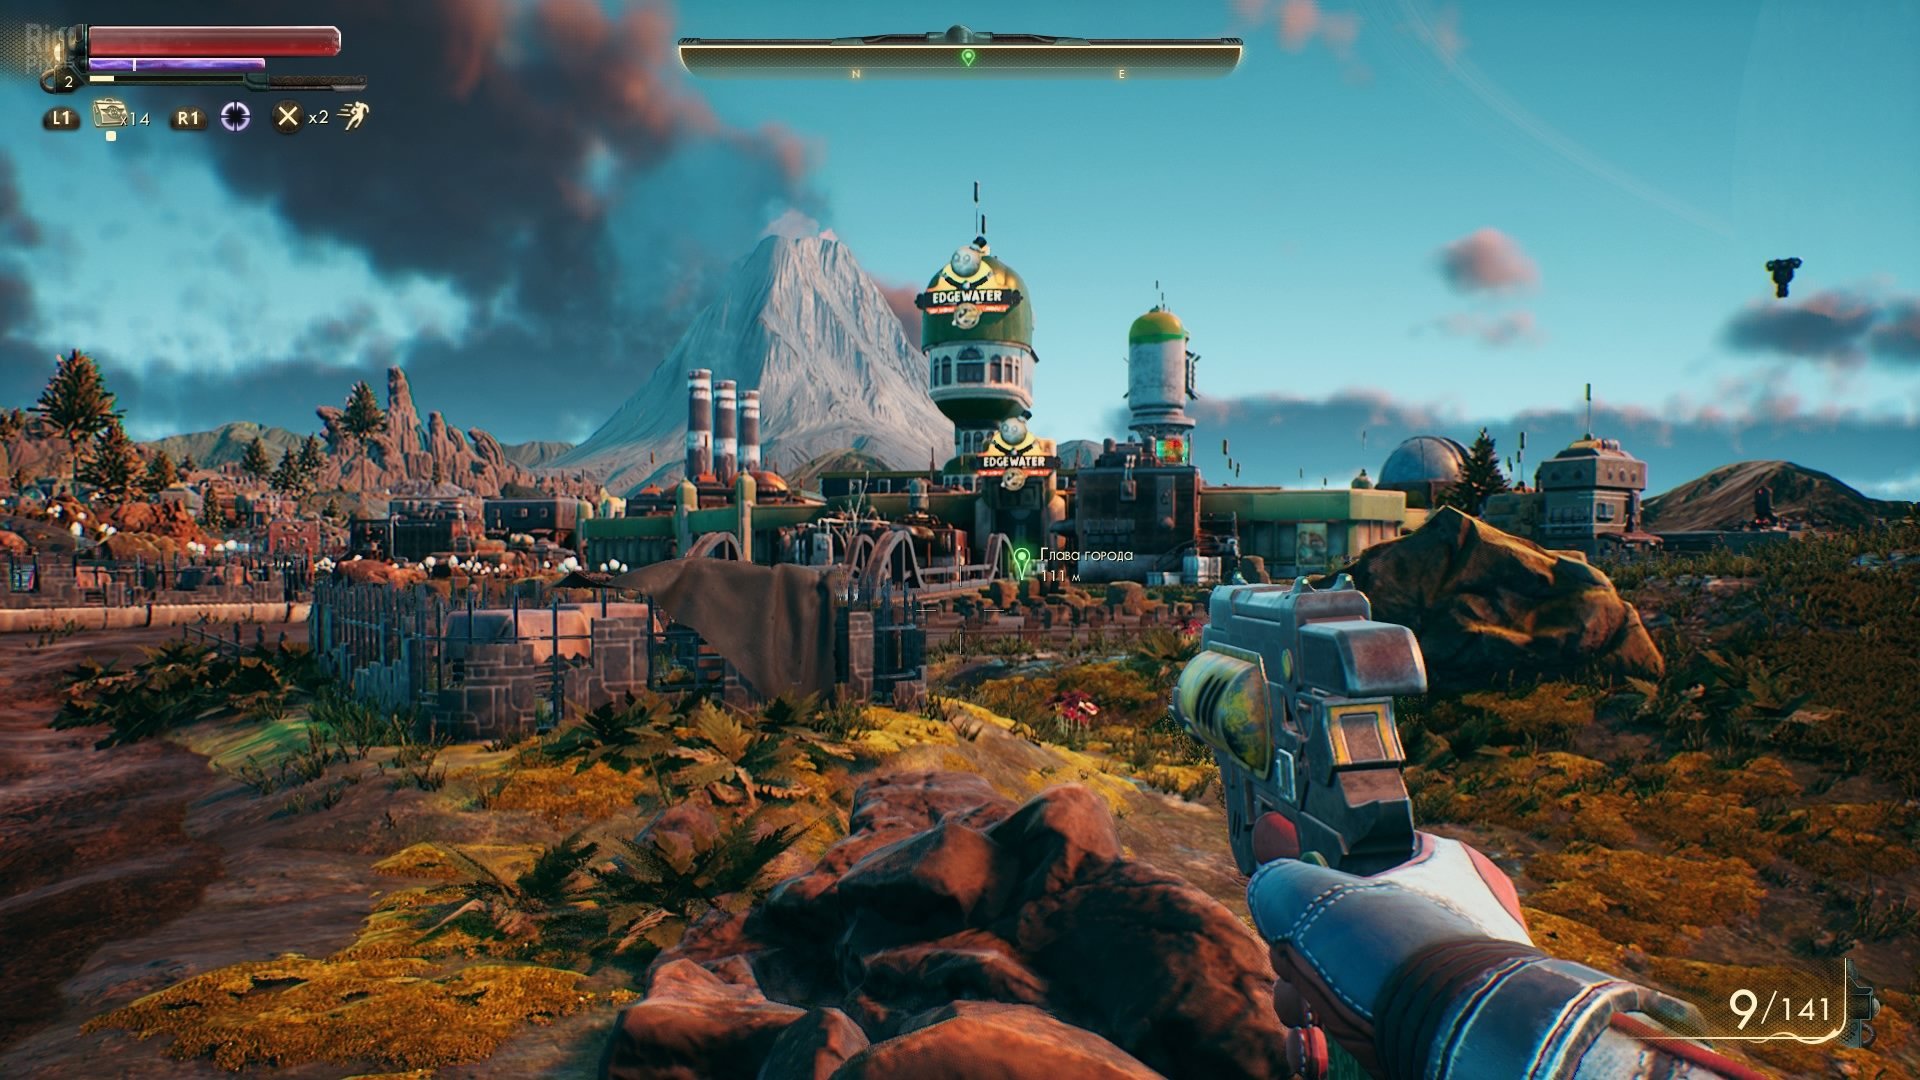 The fifth world. The Outer Worlds игра, 2019). Игра the Outer Worlds 2. Outer Worlds открытый мир. The Outer Worlds мир.